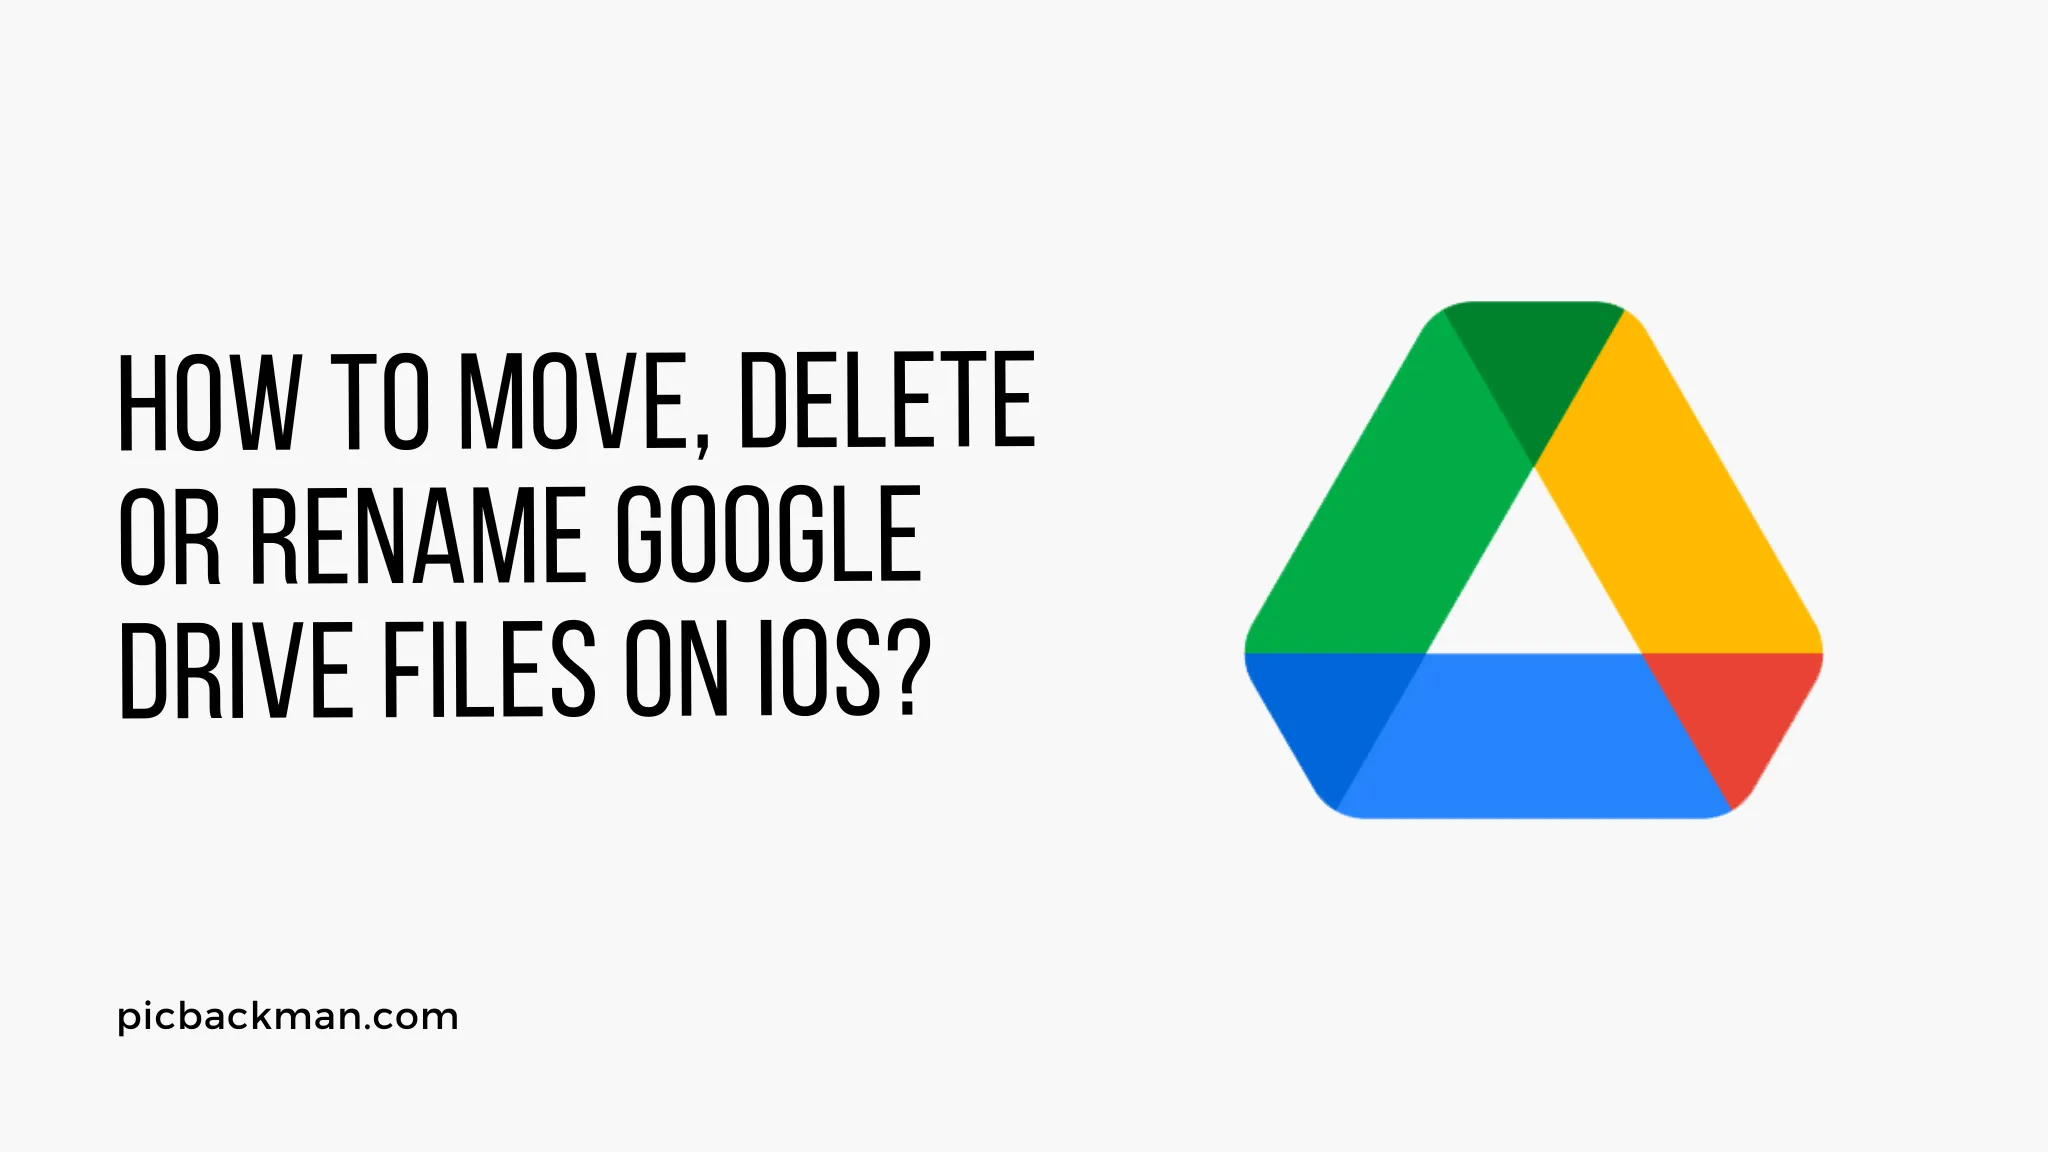 How to Move, Delete or Rename Google Drive Files on iOS?